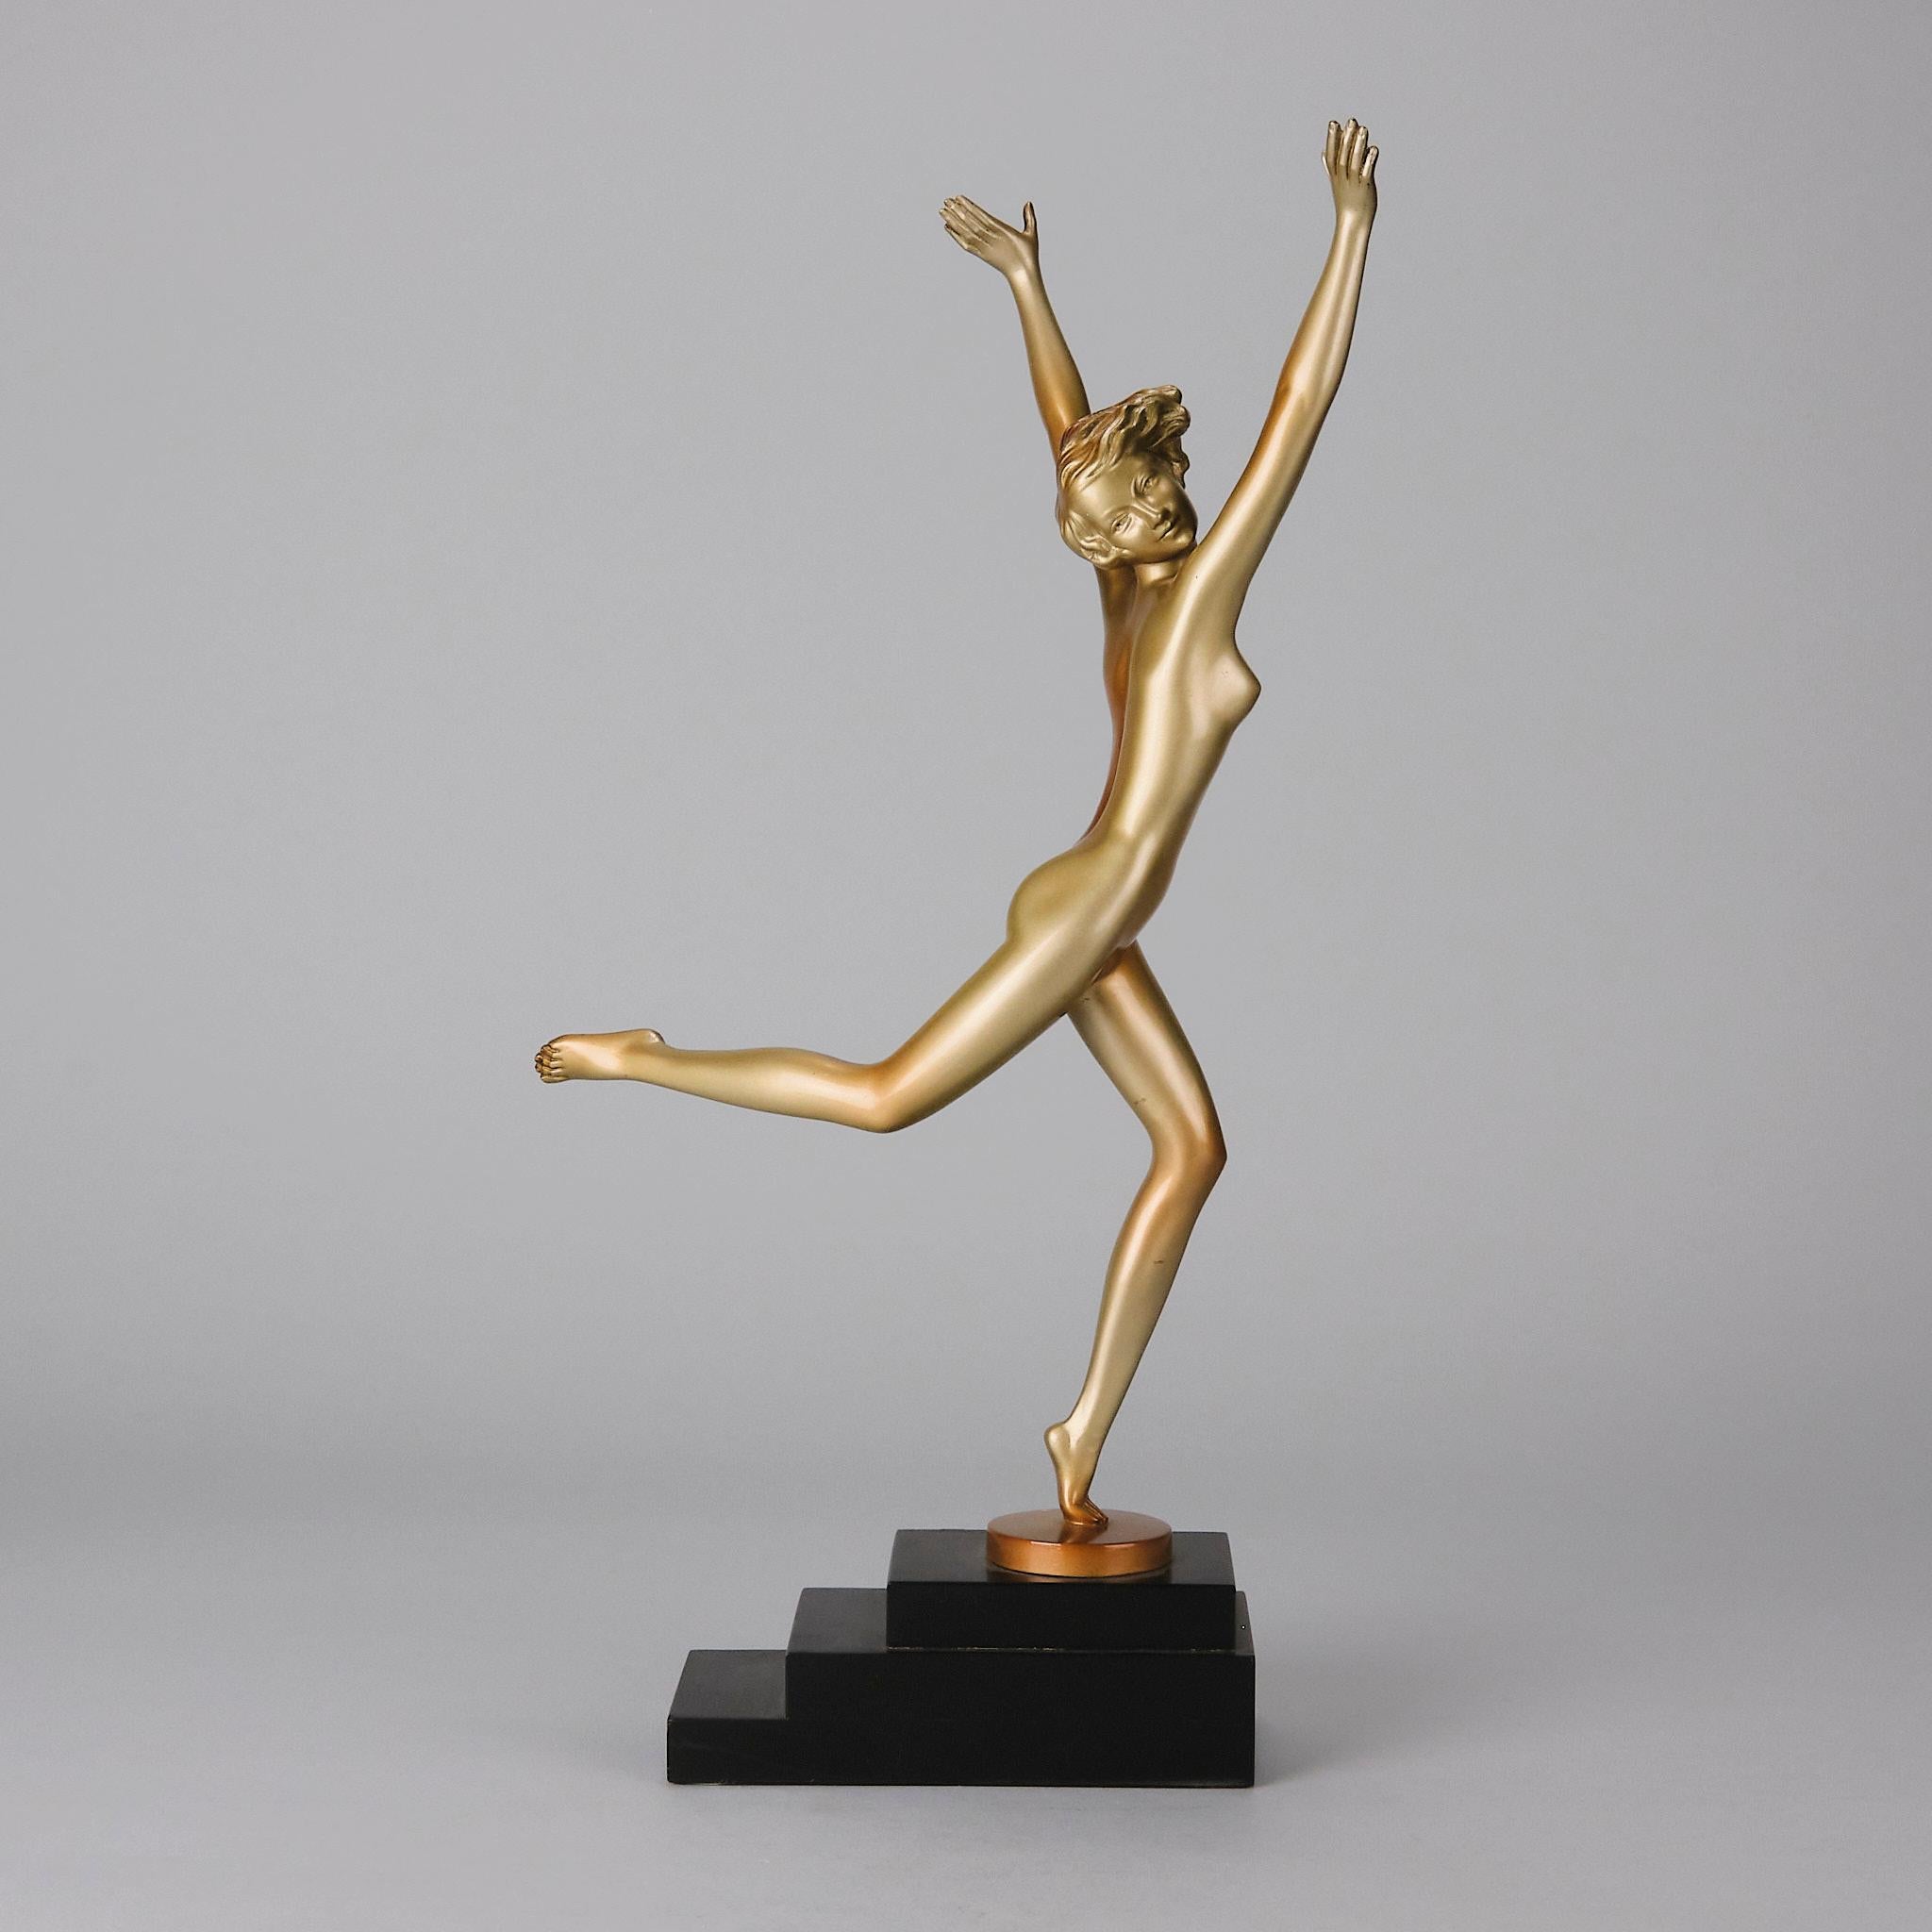 An attractive early 20th Century Art Deco cold painted bronze figure of a naked dancer with her arms raised high in an elegant pose with her rear leg raised. The sculpture exhibits excellent colour and very fine hand finished surface detail, raised